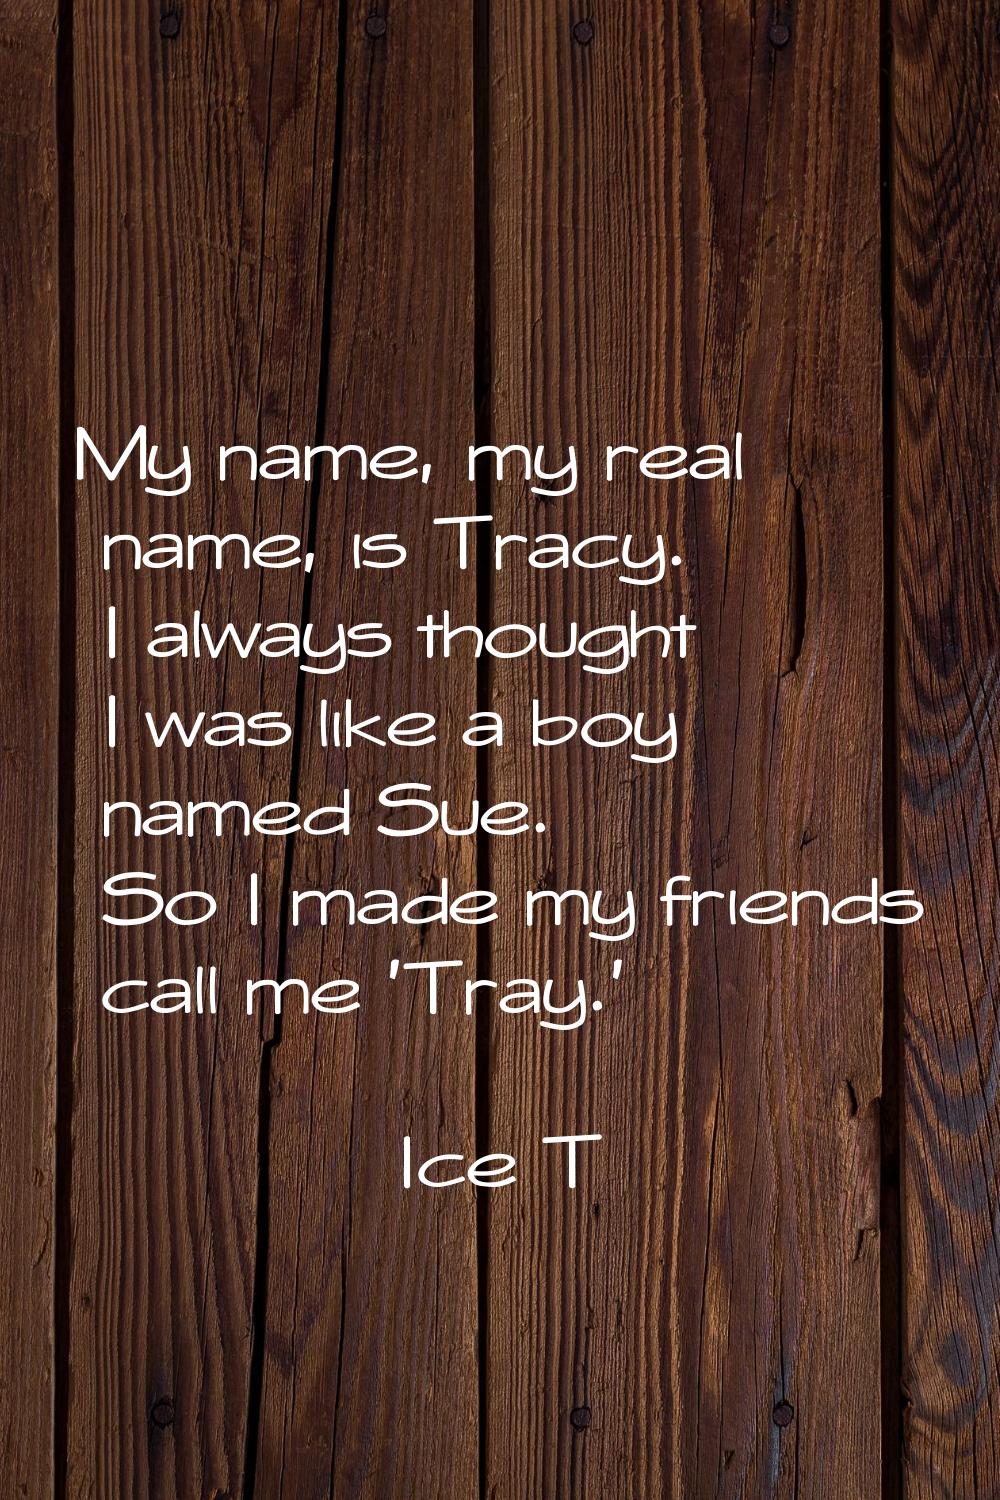 My name, my real name, is Tracy. I always thought I was like a boy named Sue. So I made my friends 